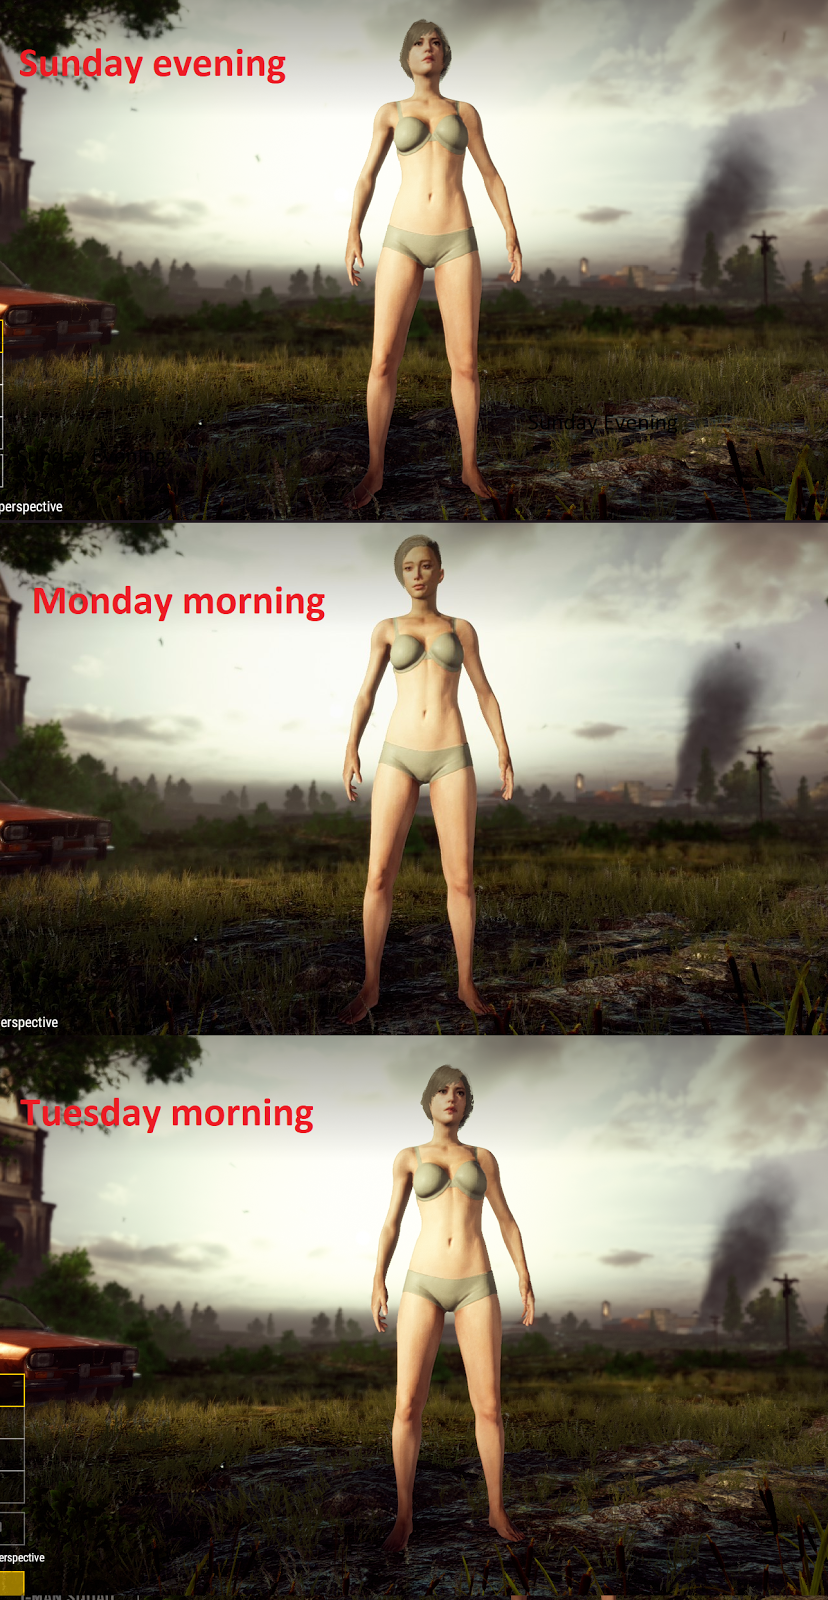 Battlegrounds Developers Accidentally Add Cameltoes, Remove Them